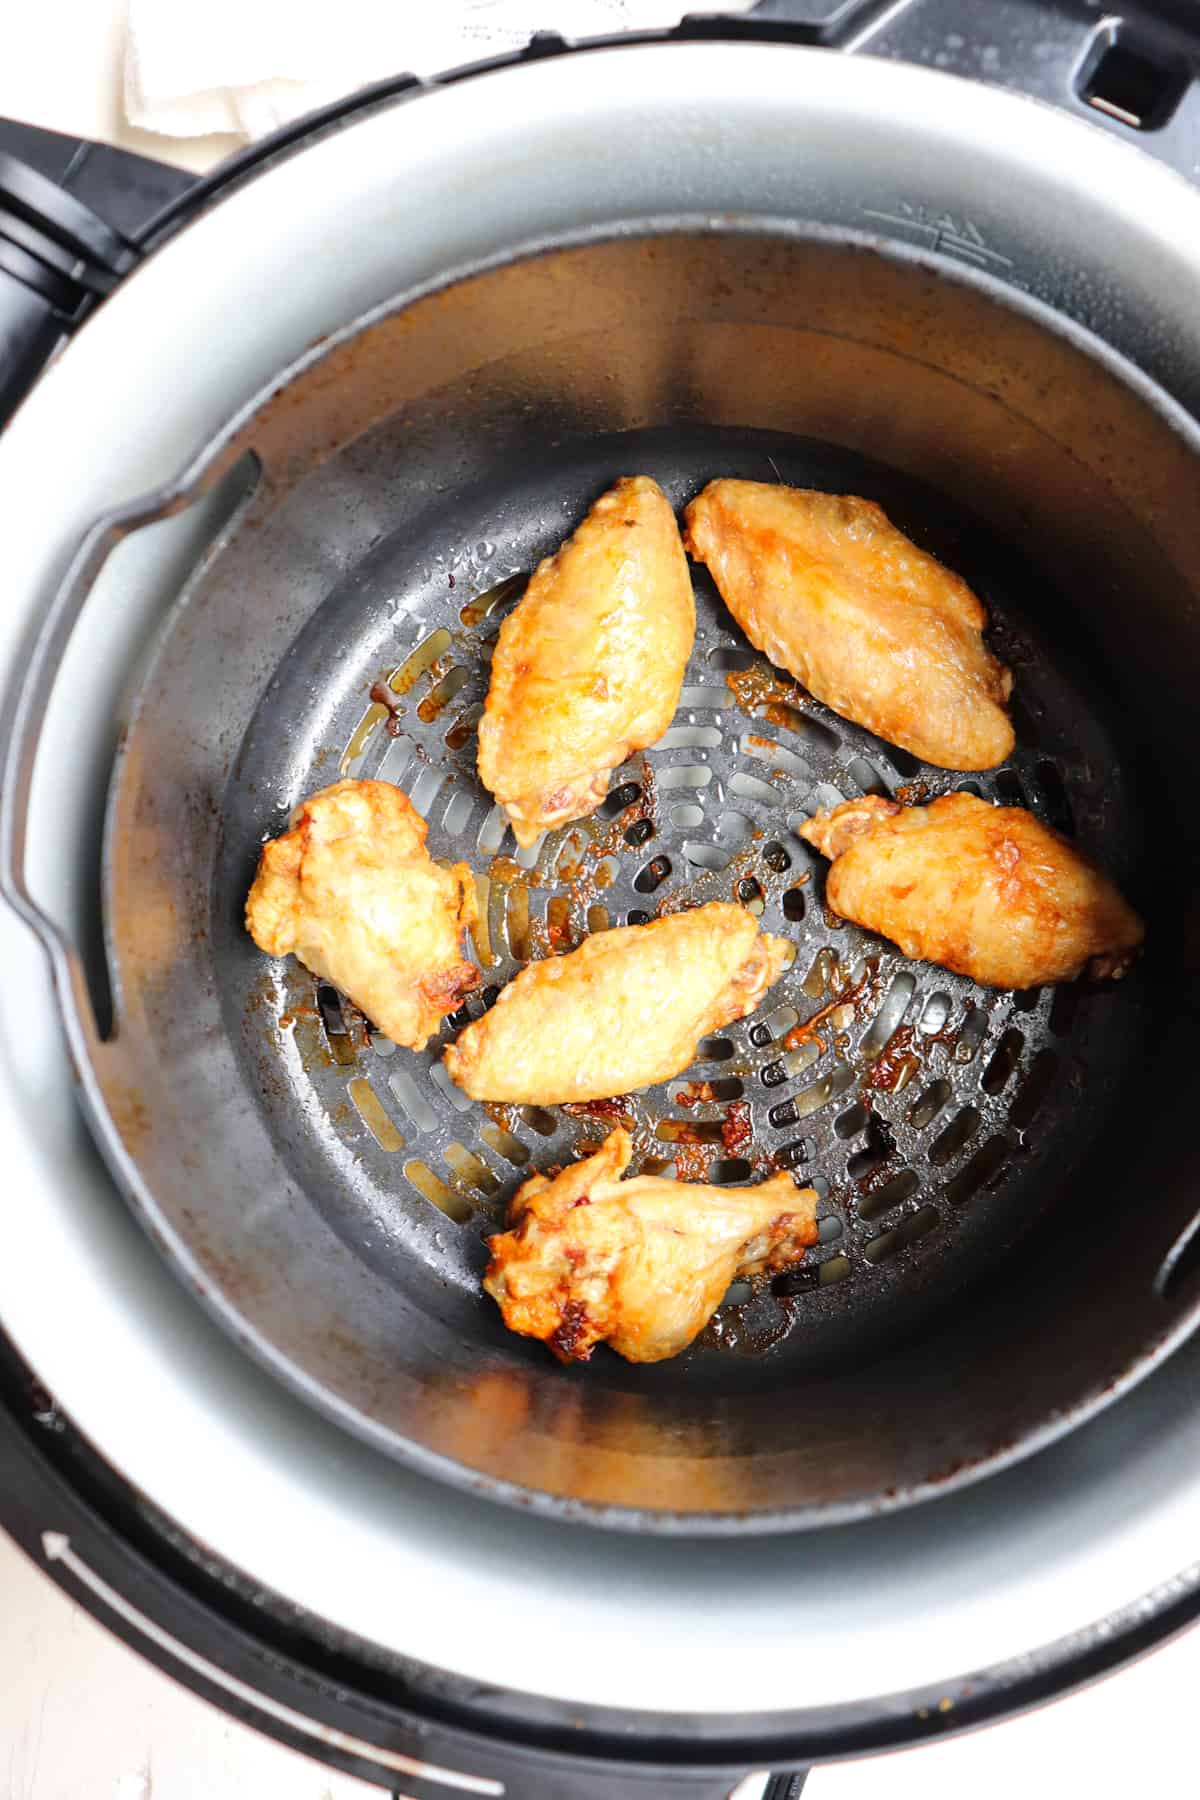 finished wings cooked from frozen in air fryer basket.